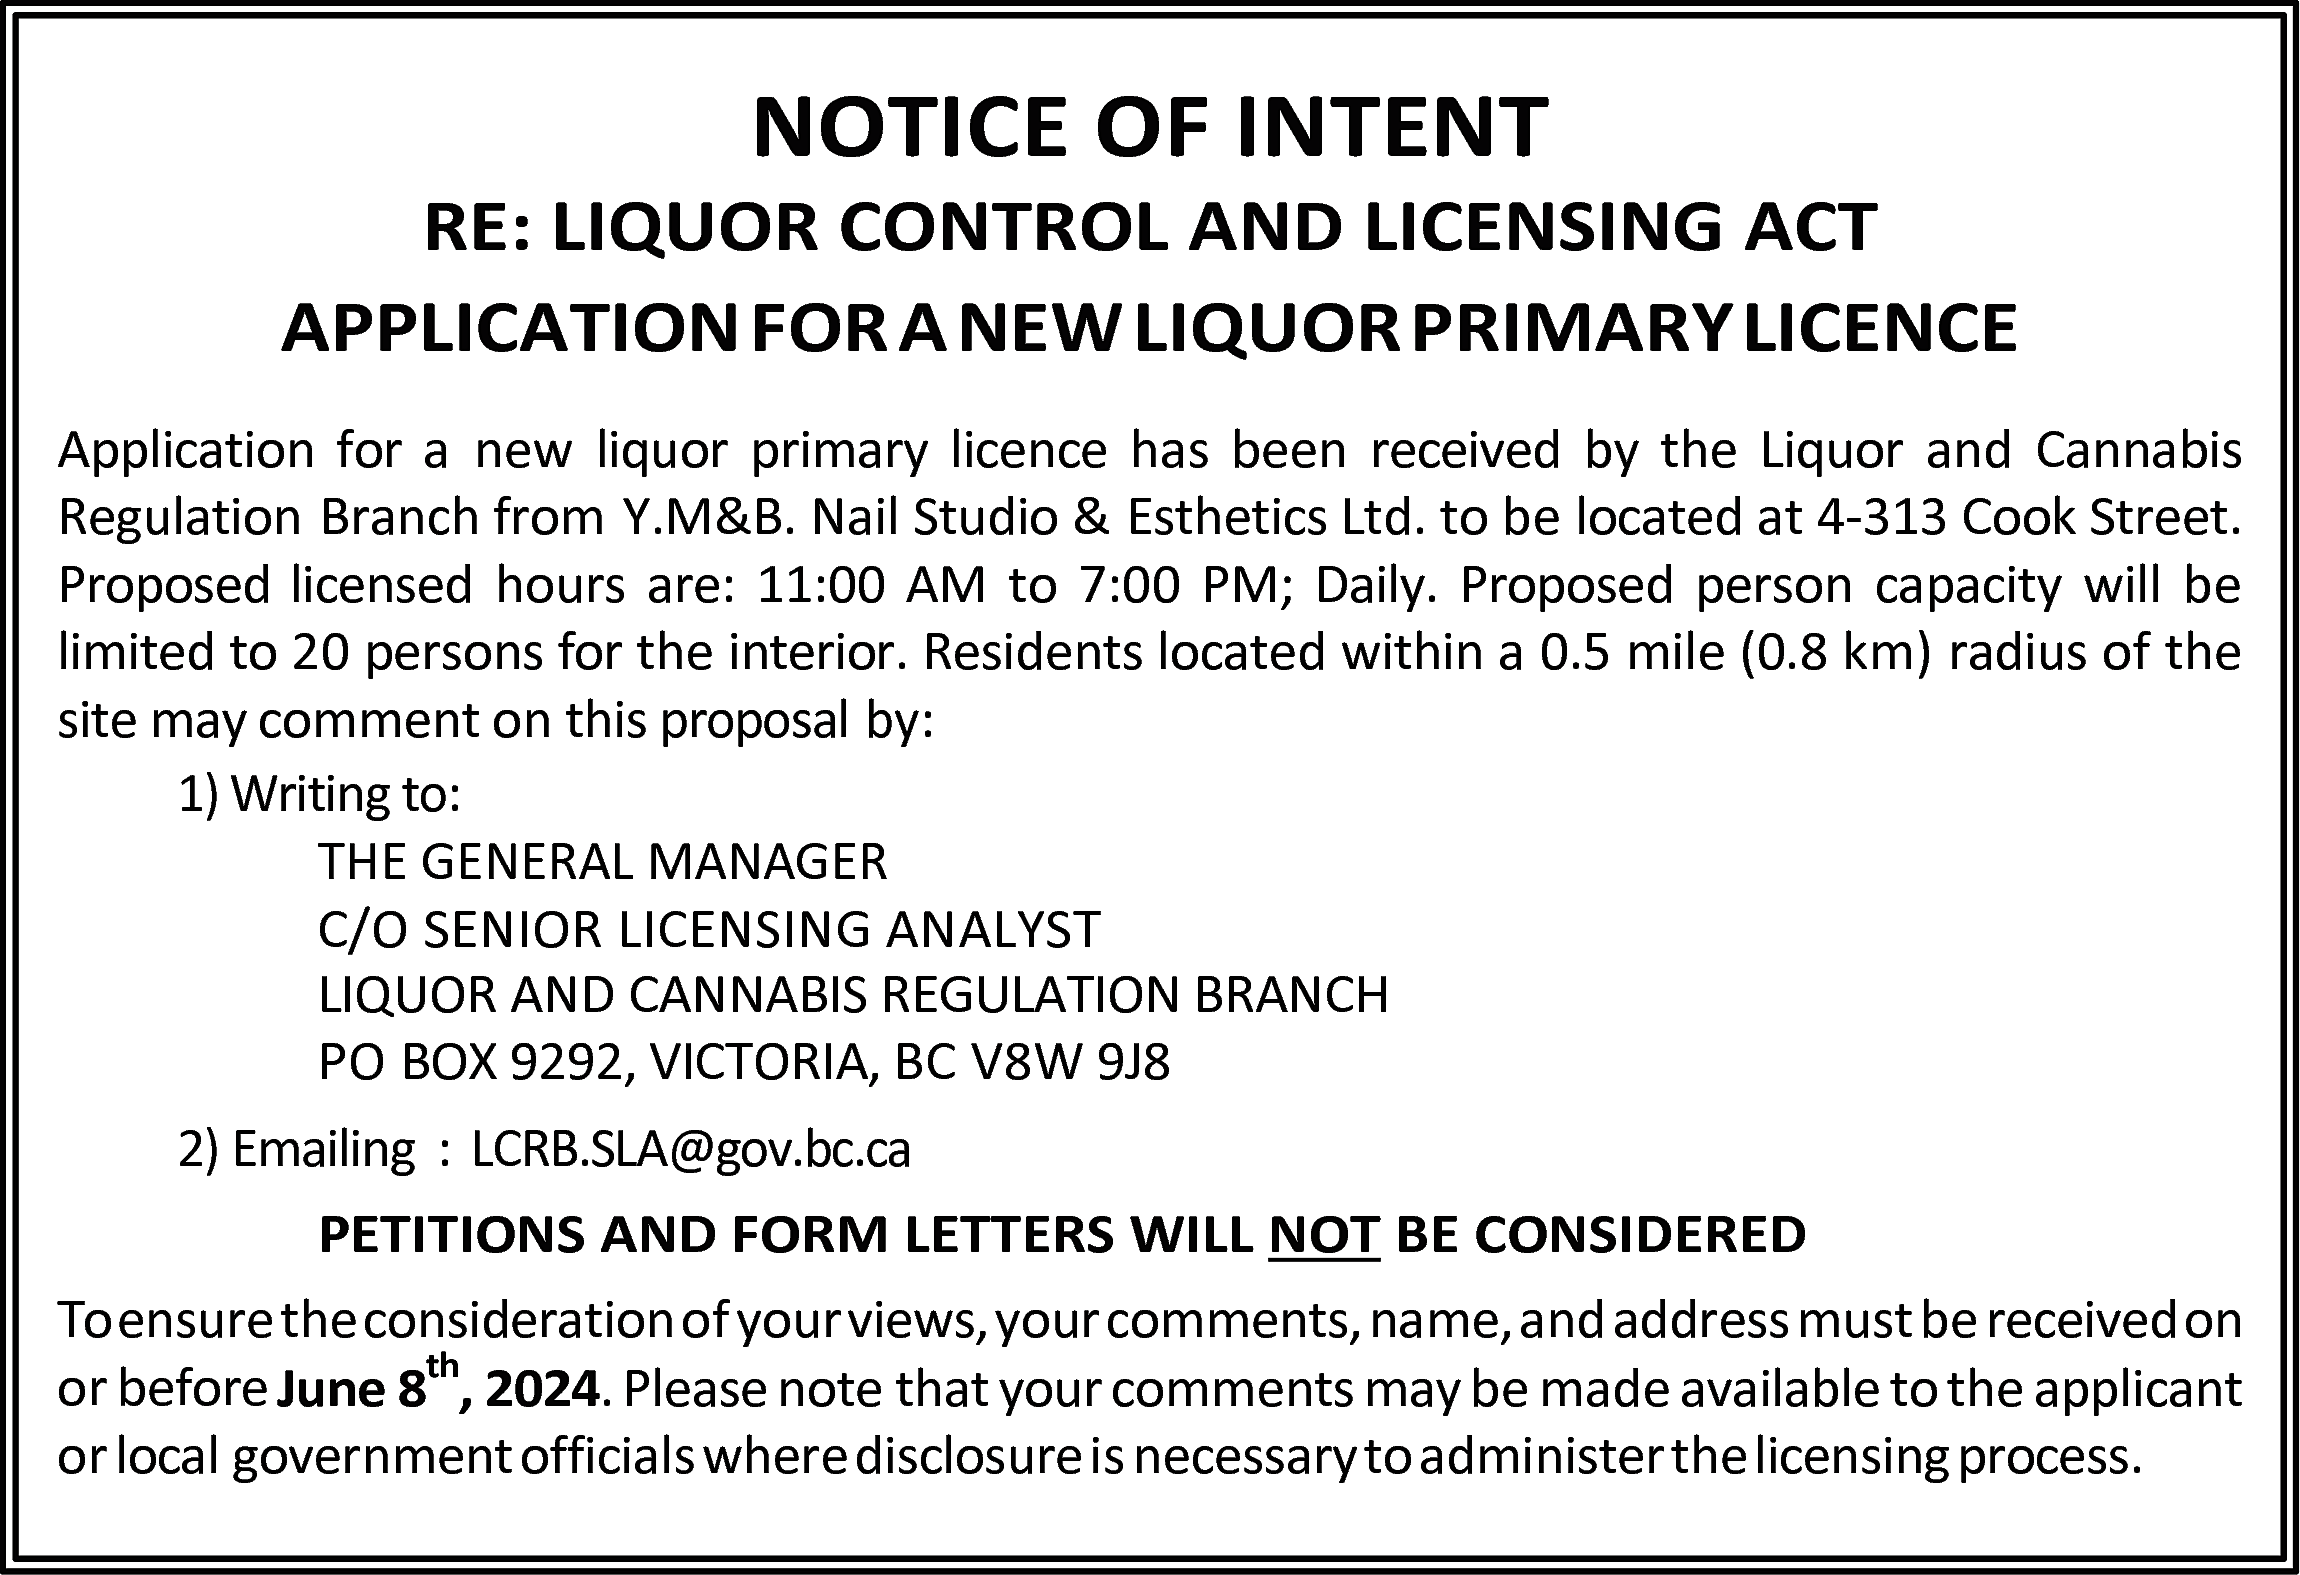 NOTICE OF INTENT <br> <br>RE:  NOTICE OF INTENT    RE: LIQUOR CONTROL AND LICENSING ACT  APPLICATION FOR A NEW LIQUOR PRIMARY LICENCE  Application for a new liquor primary licence has been received by the Liquor and Cannabis  Regulation Branch from Y.M&B. Nail Studio & Esthetics Ltd. to be located at 4-313 Cook Street.  Proposed licensed hours are: 11:00 AM to 7:00 PM; Daily. Proposed person capacity will be  limited to 20 persons for the interior. Residents located within a 0.5 mile (0.8 km) radius of the  site may comment on this proposal by:  1) Writing to:  THE GENERAL MANAGER  C/O SENIOR LICENSING ANALYST  LIQUOR AND CANNABIS REGULATION BRANCH  PO BOX 9292, VICTORIA, BC V8W 9J8  2) Emailing : LCRB.SLA@gov.bc.ca  PETITIONS AND FORM LETTERS WILL NOT BE CONSIDERED  To ensure the consideration of your views, your comments, name, and address must be received on  th  or before June 8 , 2024. Please note that your comments may be made available to the applicant  or local government officials where disclosure is necessary to administer the licensing process.    